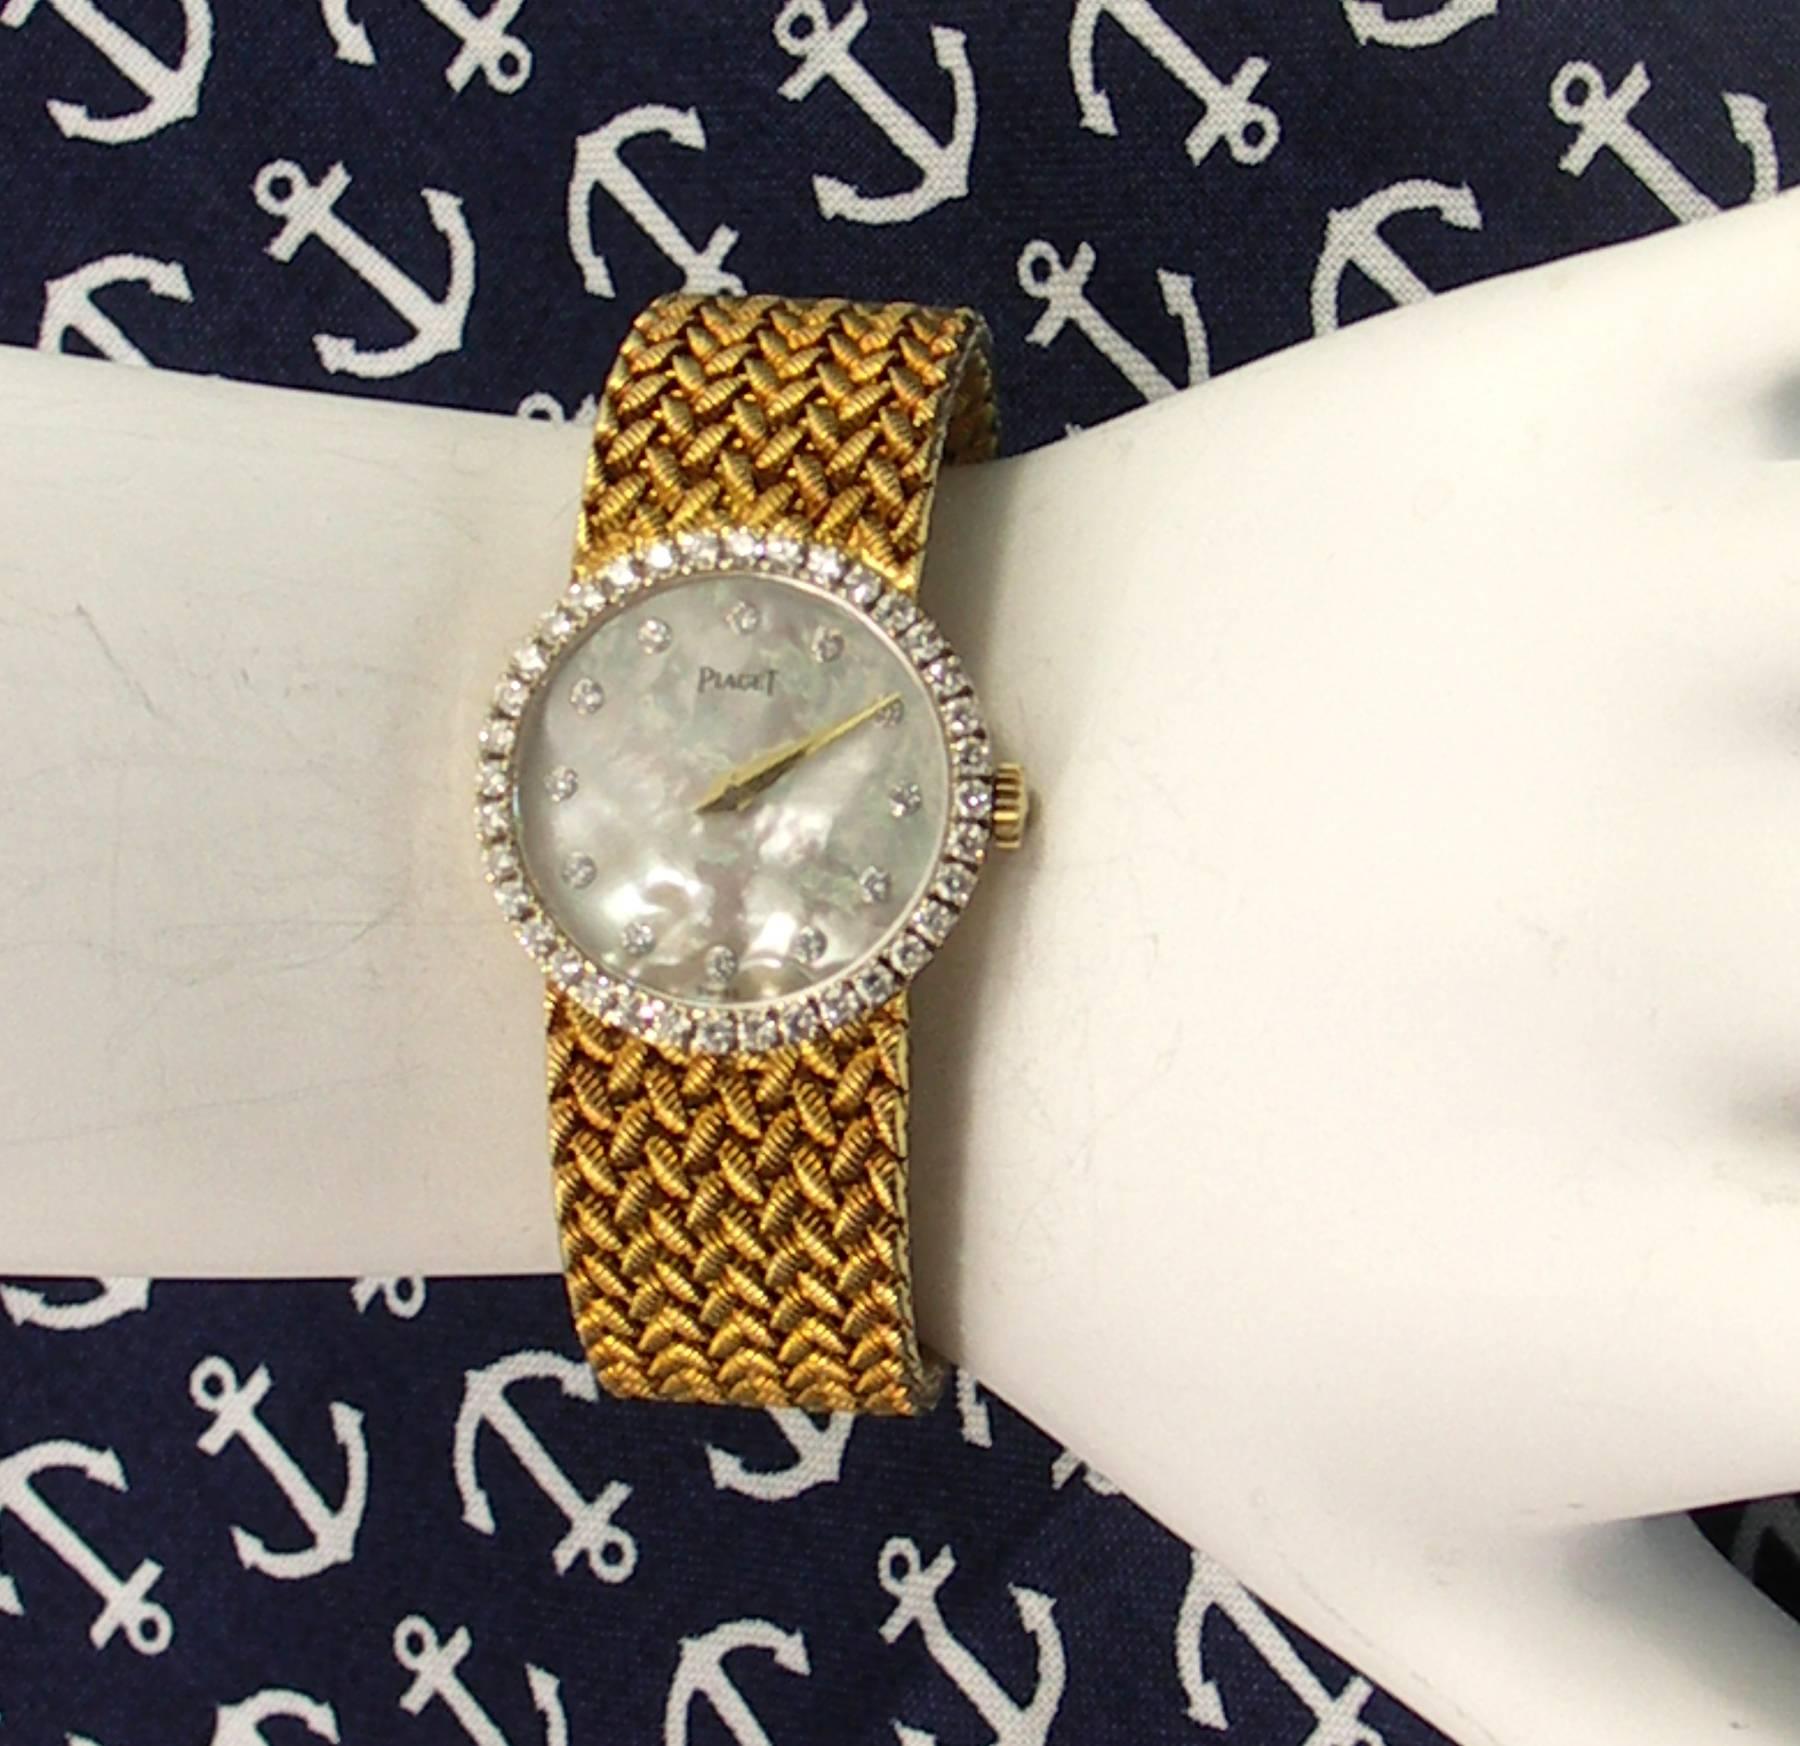 A lady's 18K yellow gold Piaget wrist watch with diamond bezel, and mother of pearl dial with diamond markers. In total, there are approximately 1.25ct of round brilliant cut diamonds.
Overall length is 6 1/8 inches.